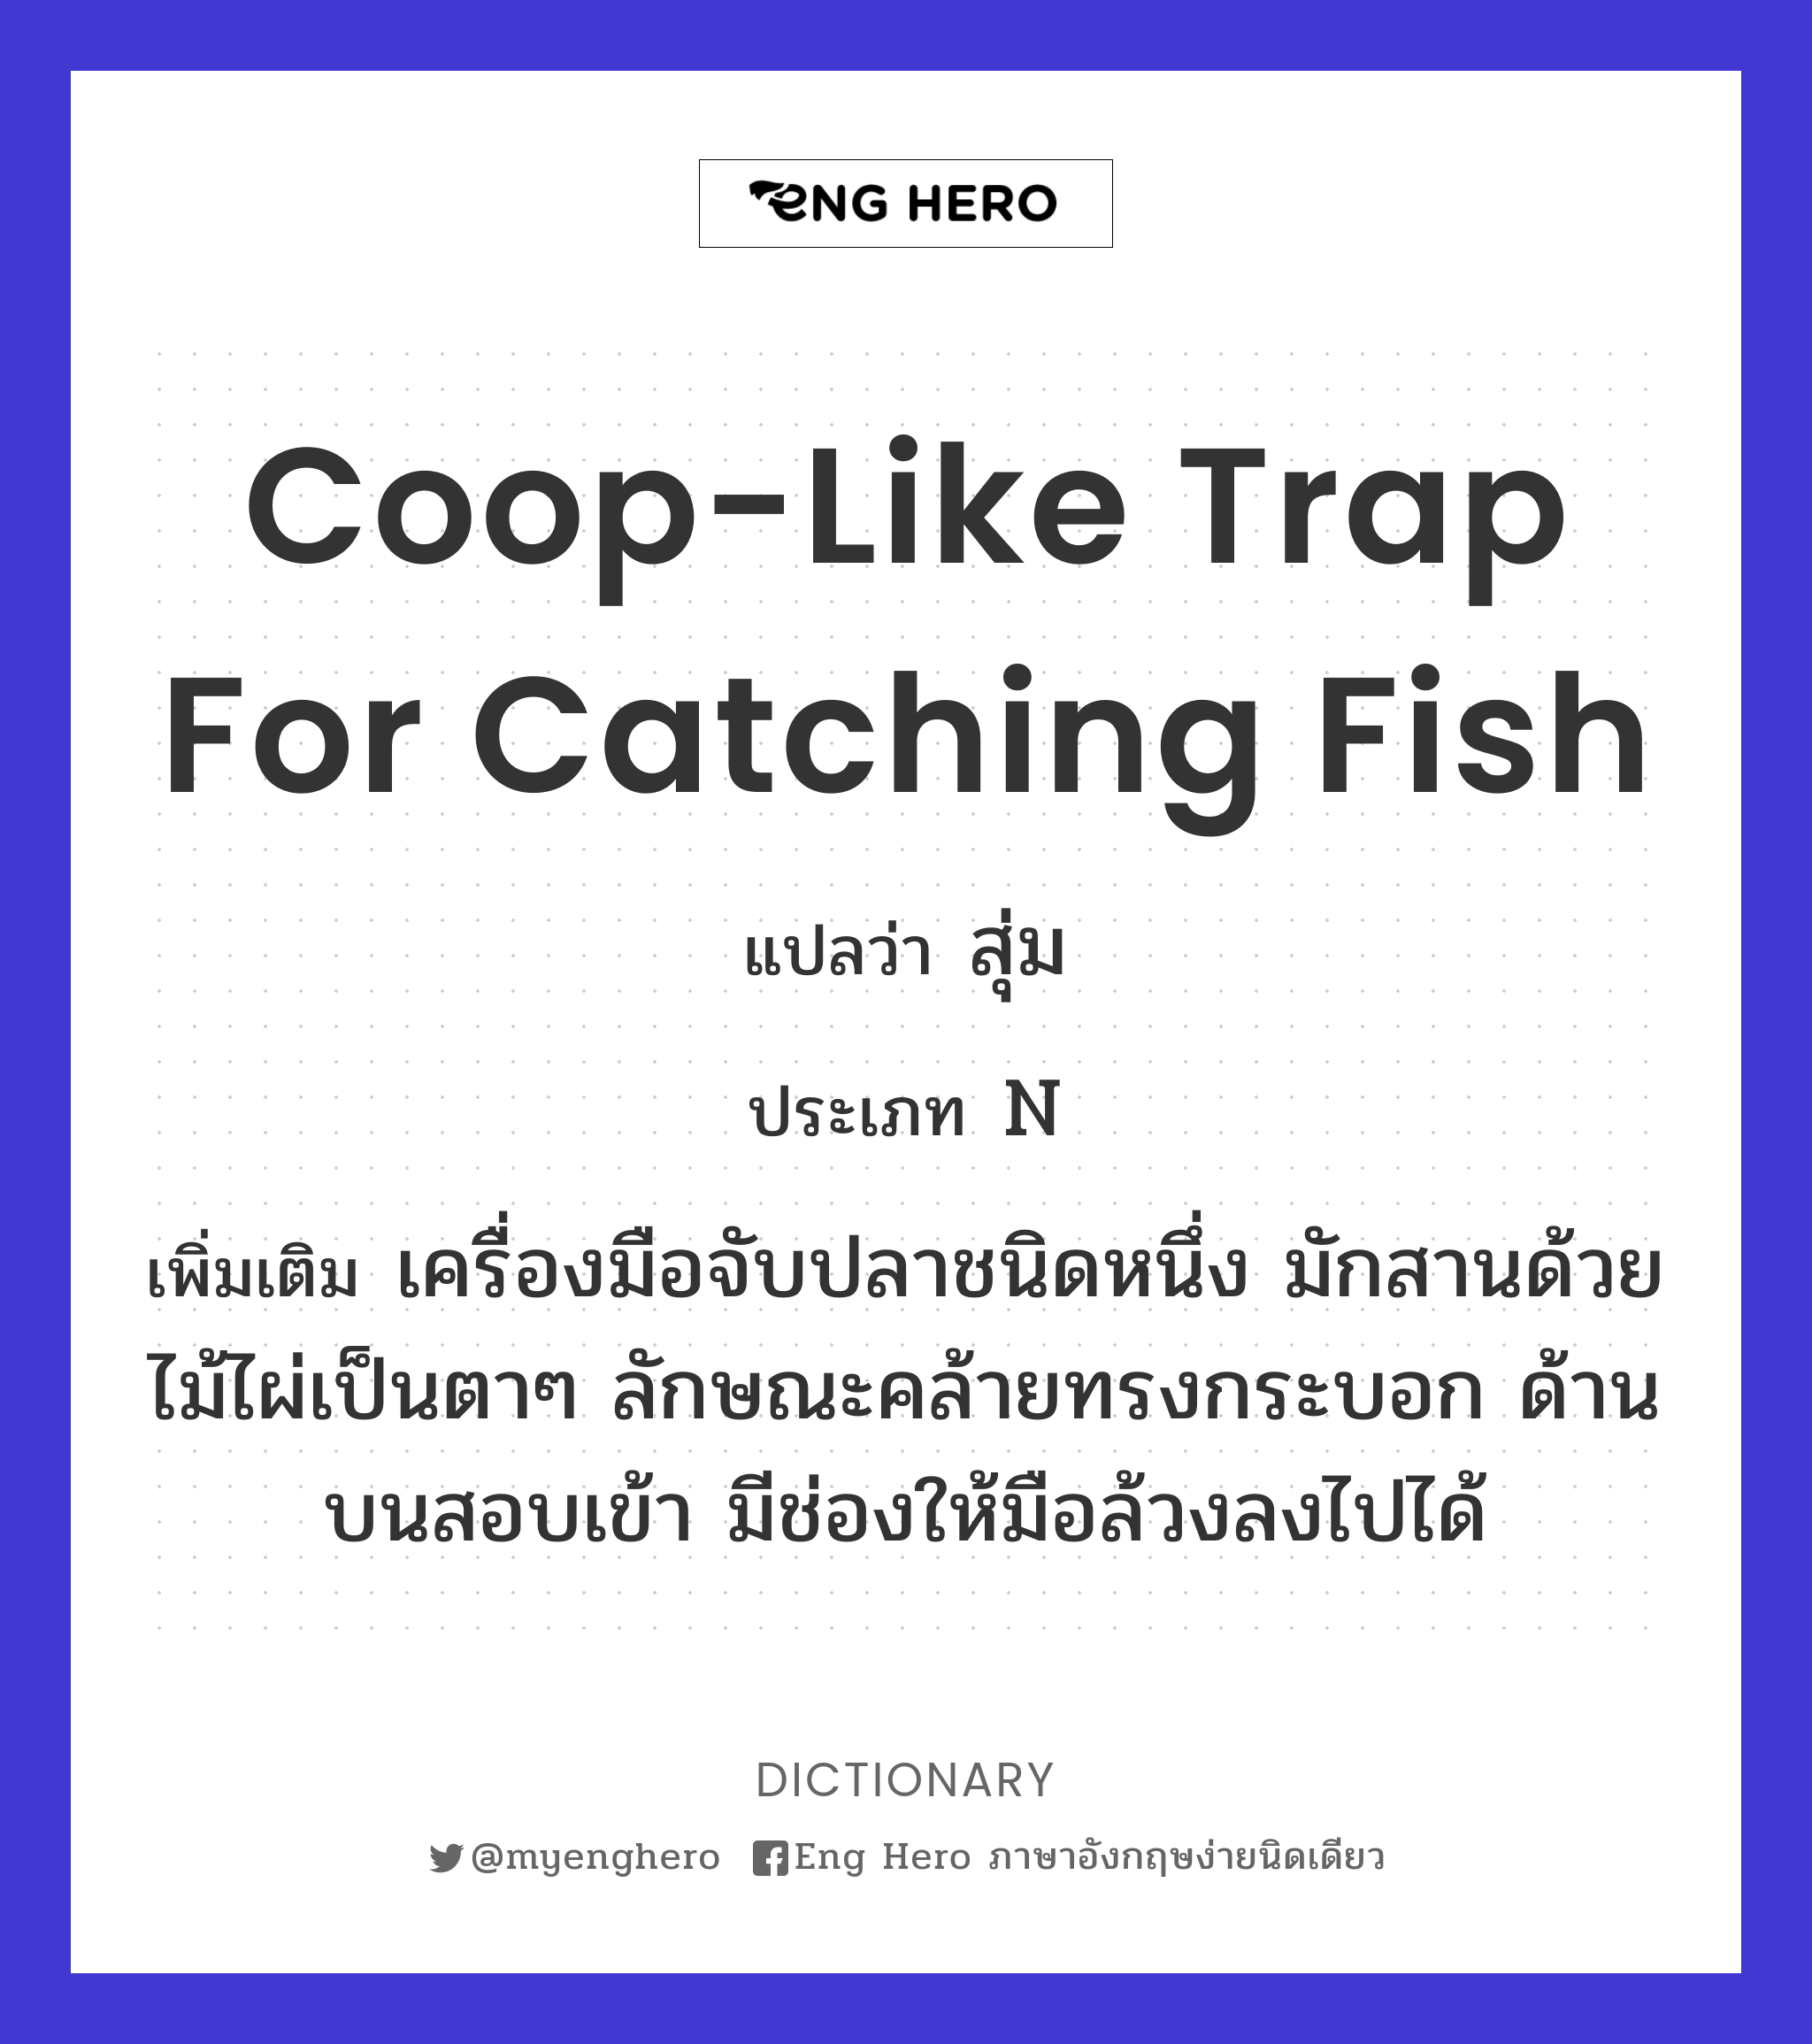 coop-like trap for catching fish